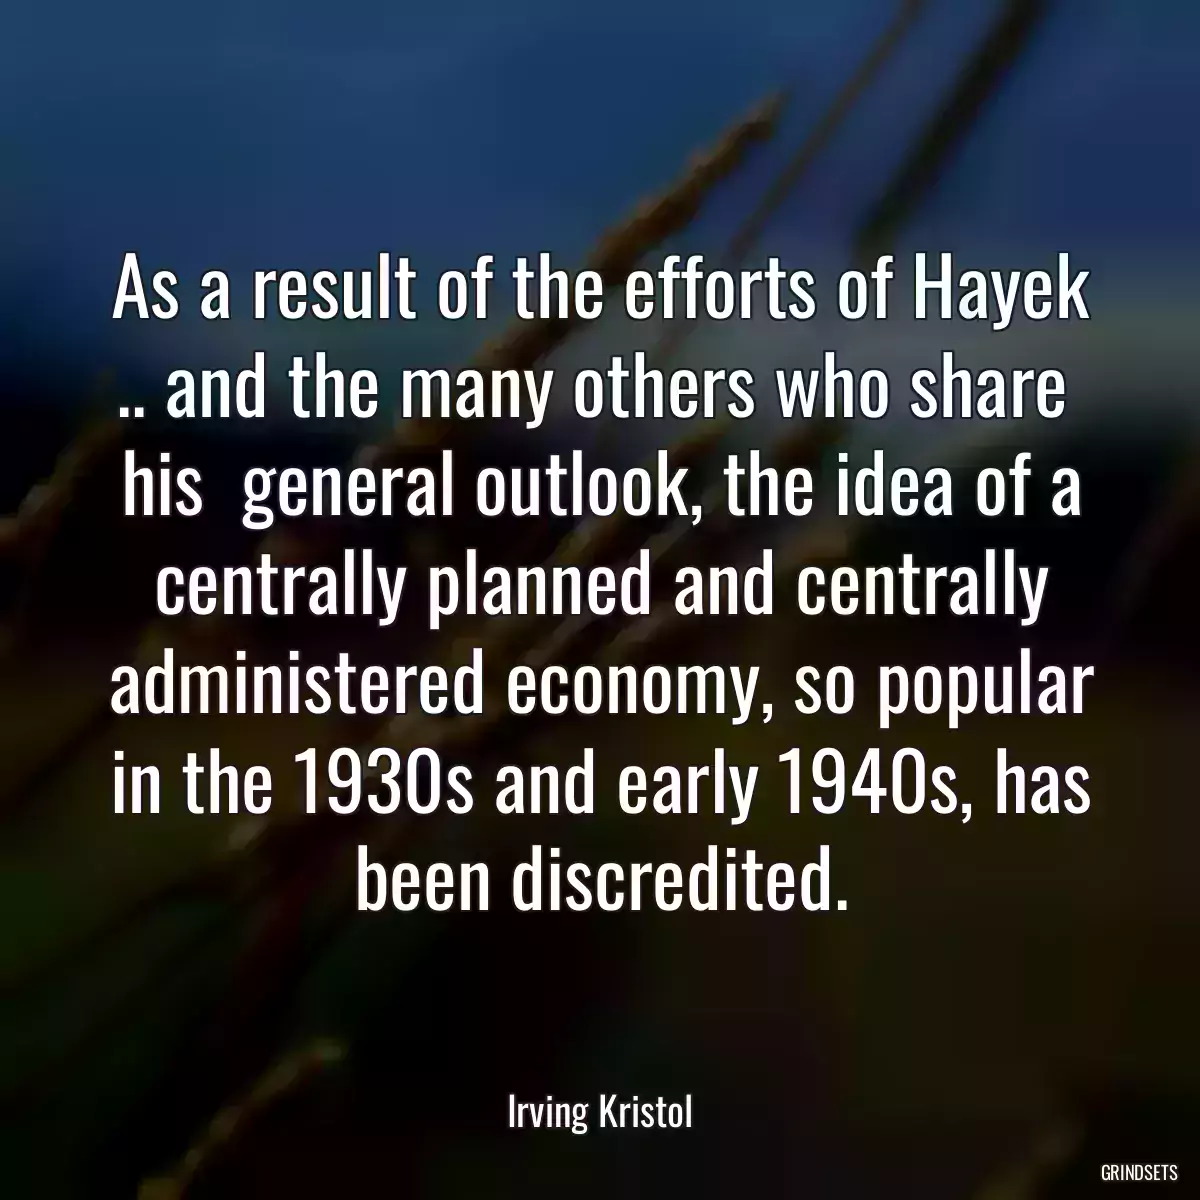 As a result of the efforts of Hayek .. and the many others who share  his  general outlook, the idea of a centrally planned and centrally administered economy, so popular in the 1930s and early 1940s, has been discredited.